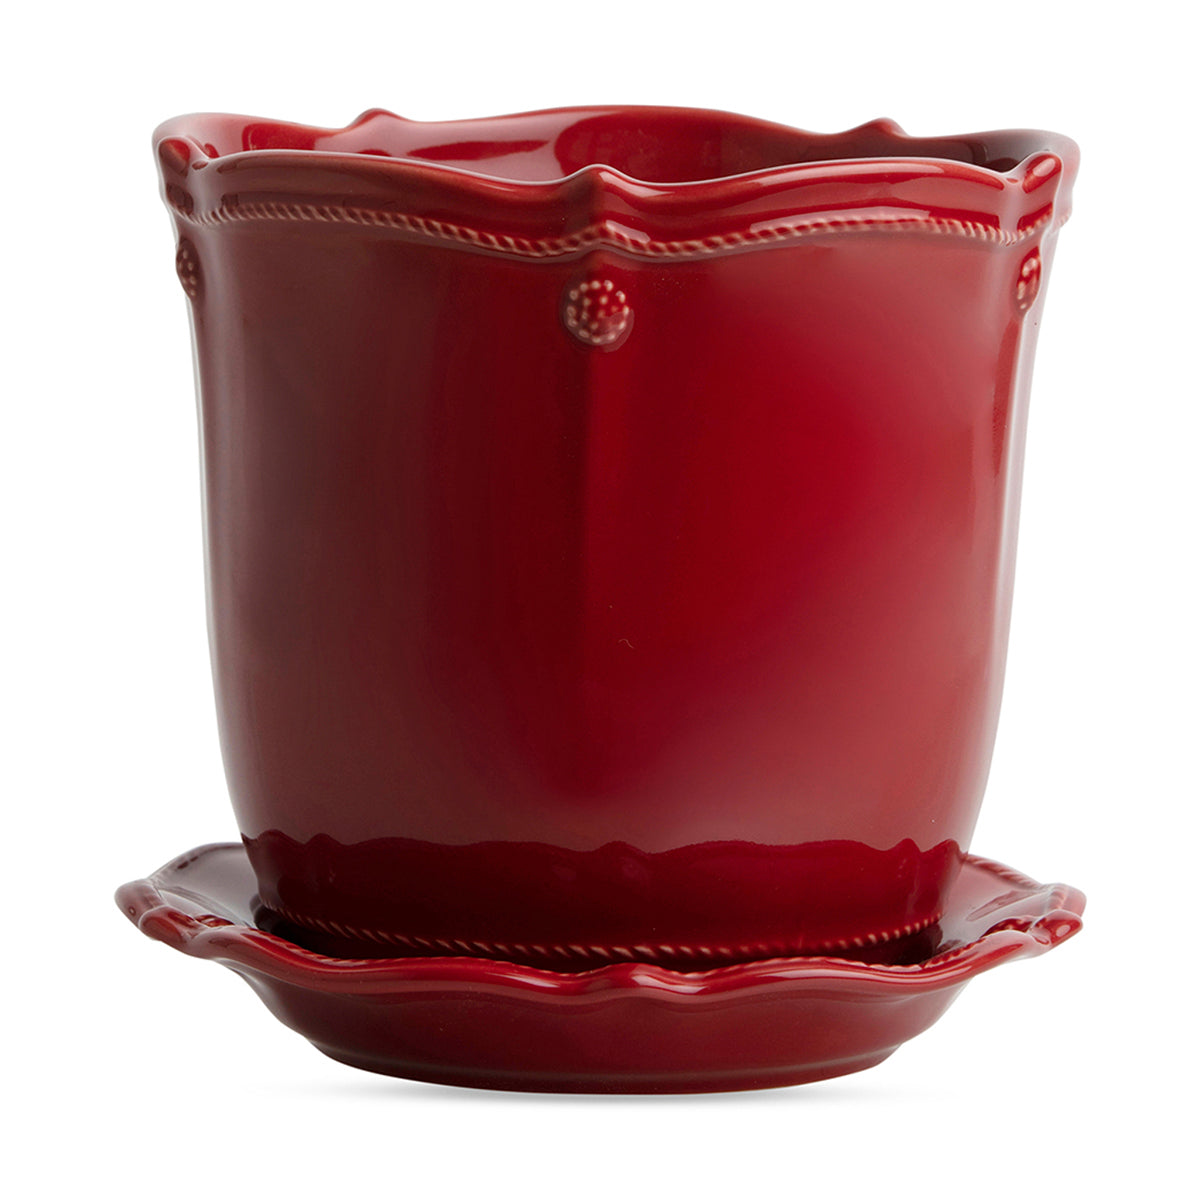 Berry & Thread 7in Planter - Ruby-1st